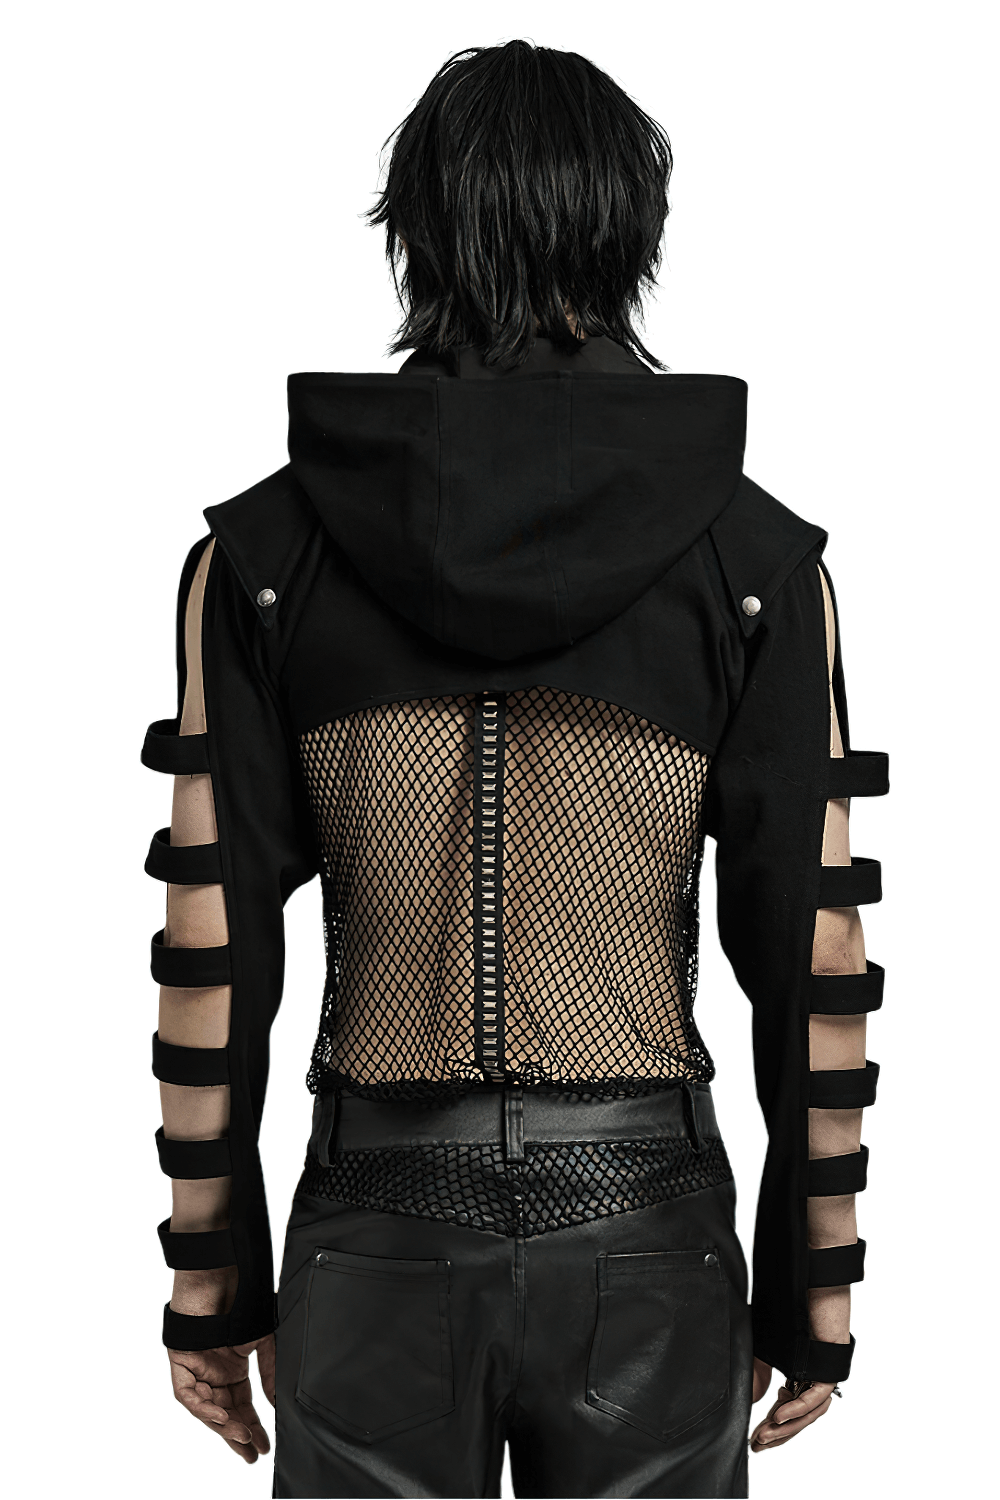 Punk Black Hooded Short Jacket With Hollow Sleeves